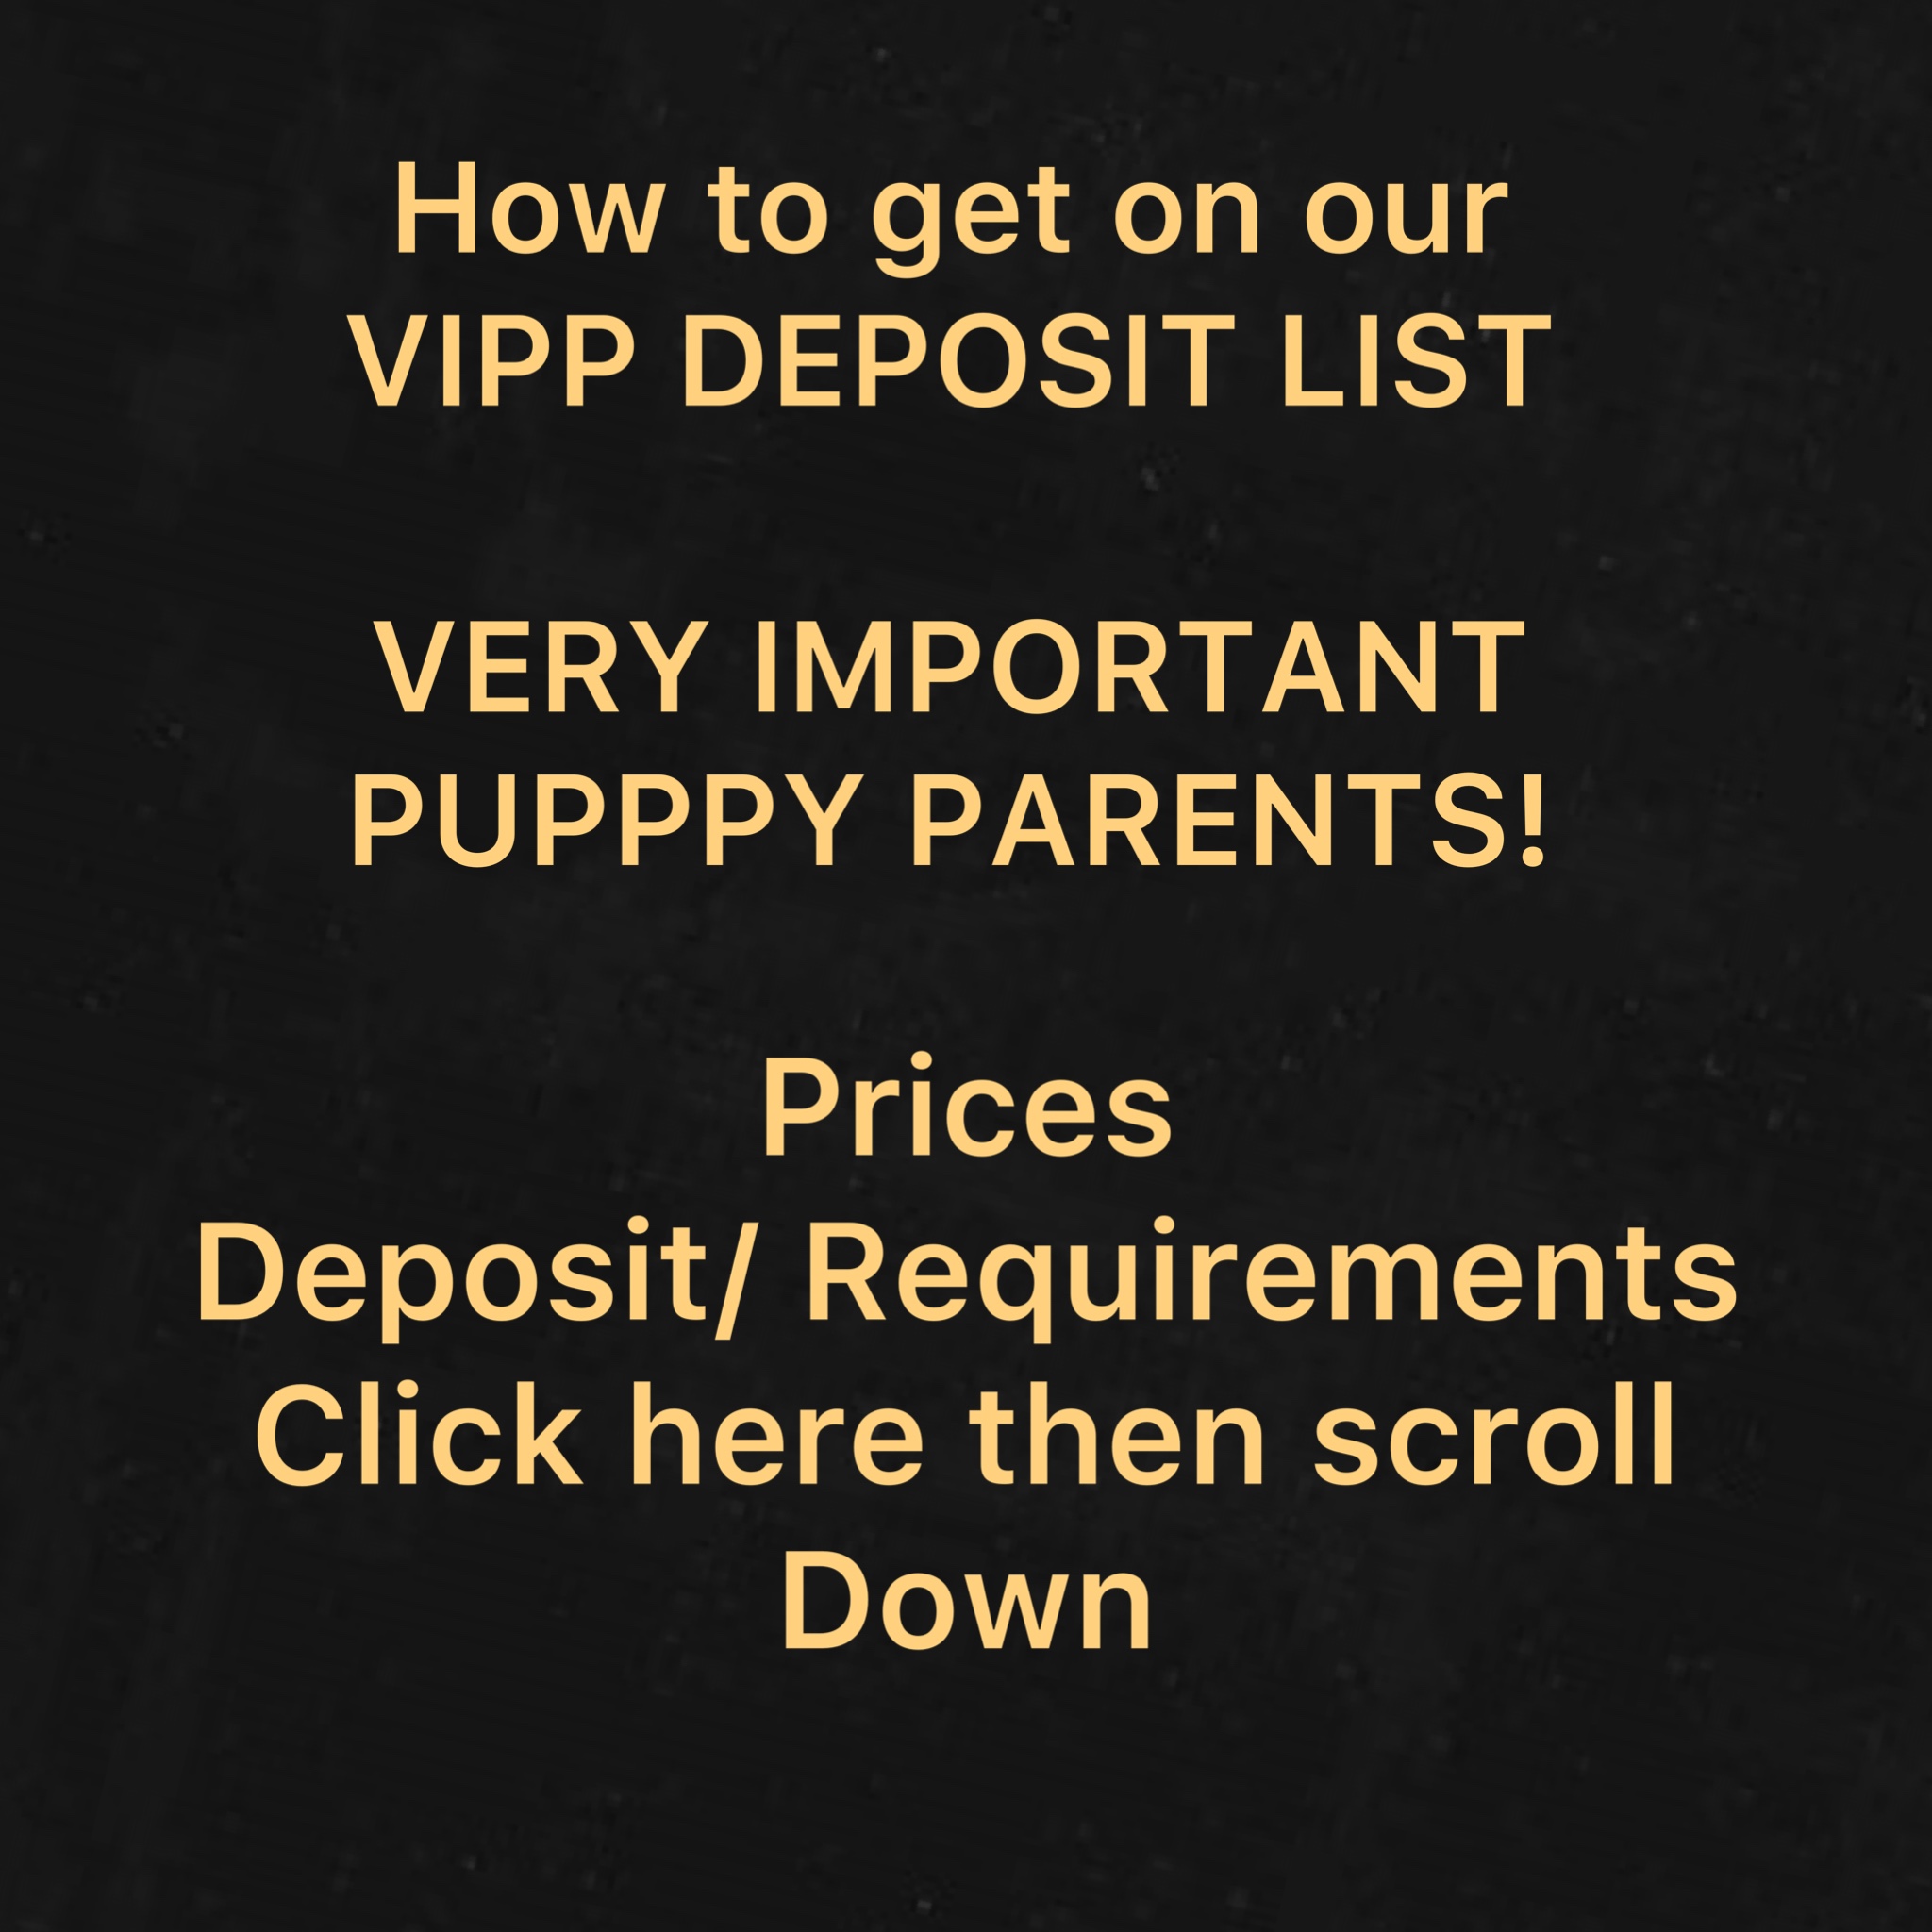 Prices and Deposits! Read all about it!